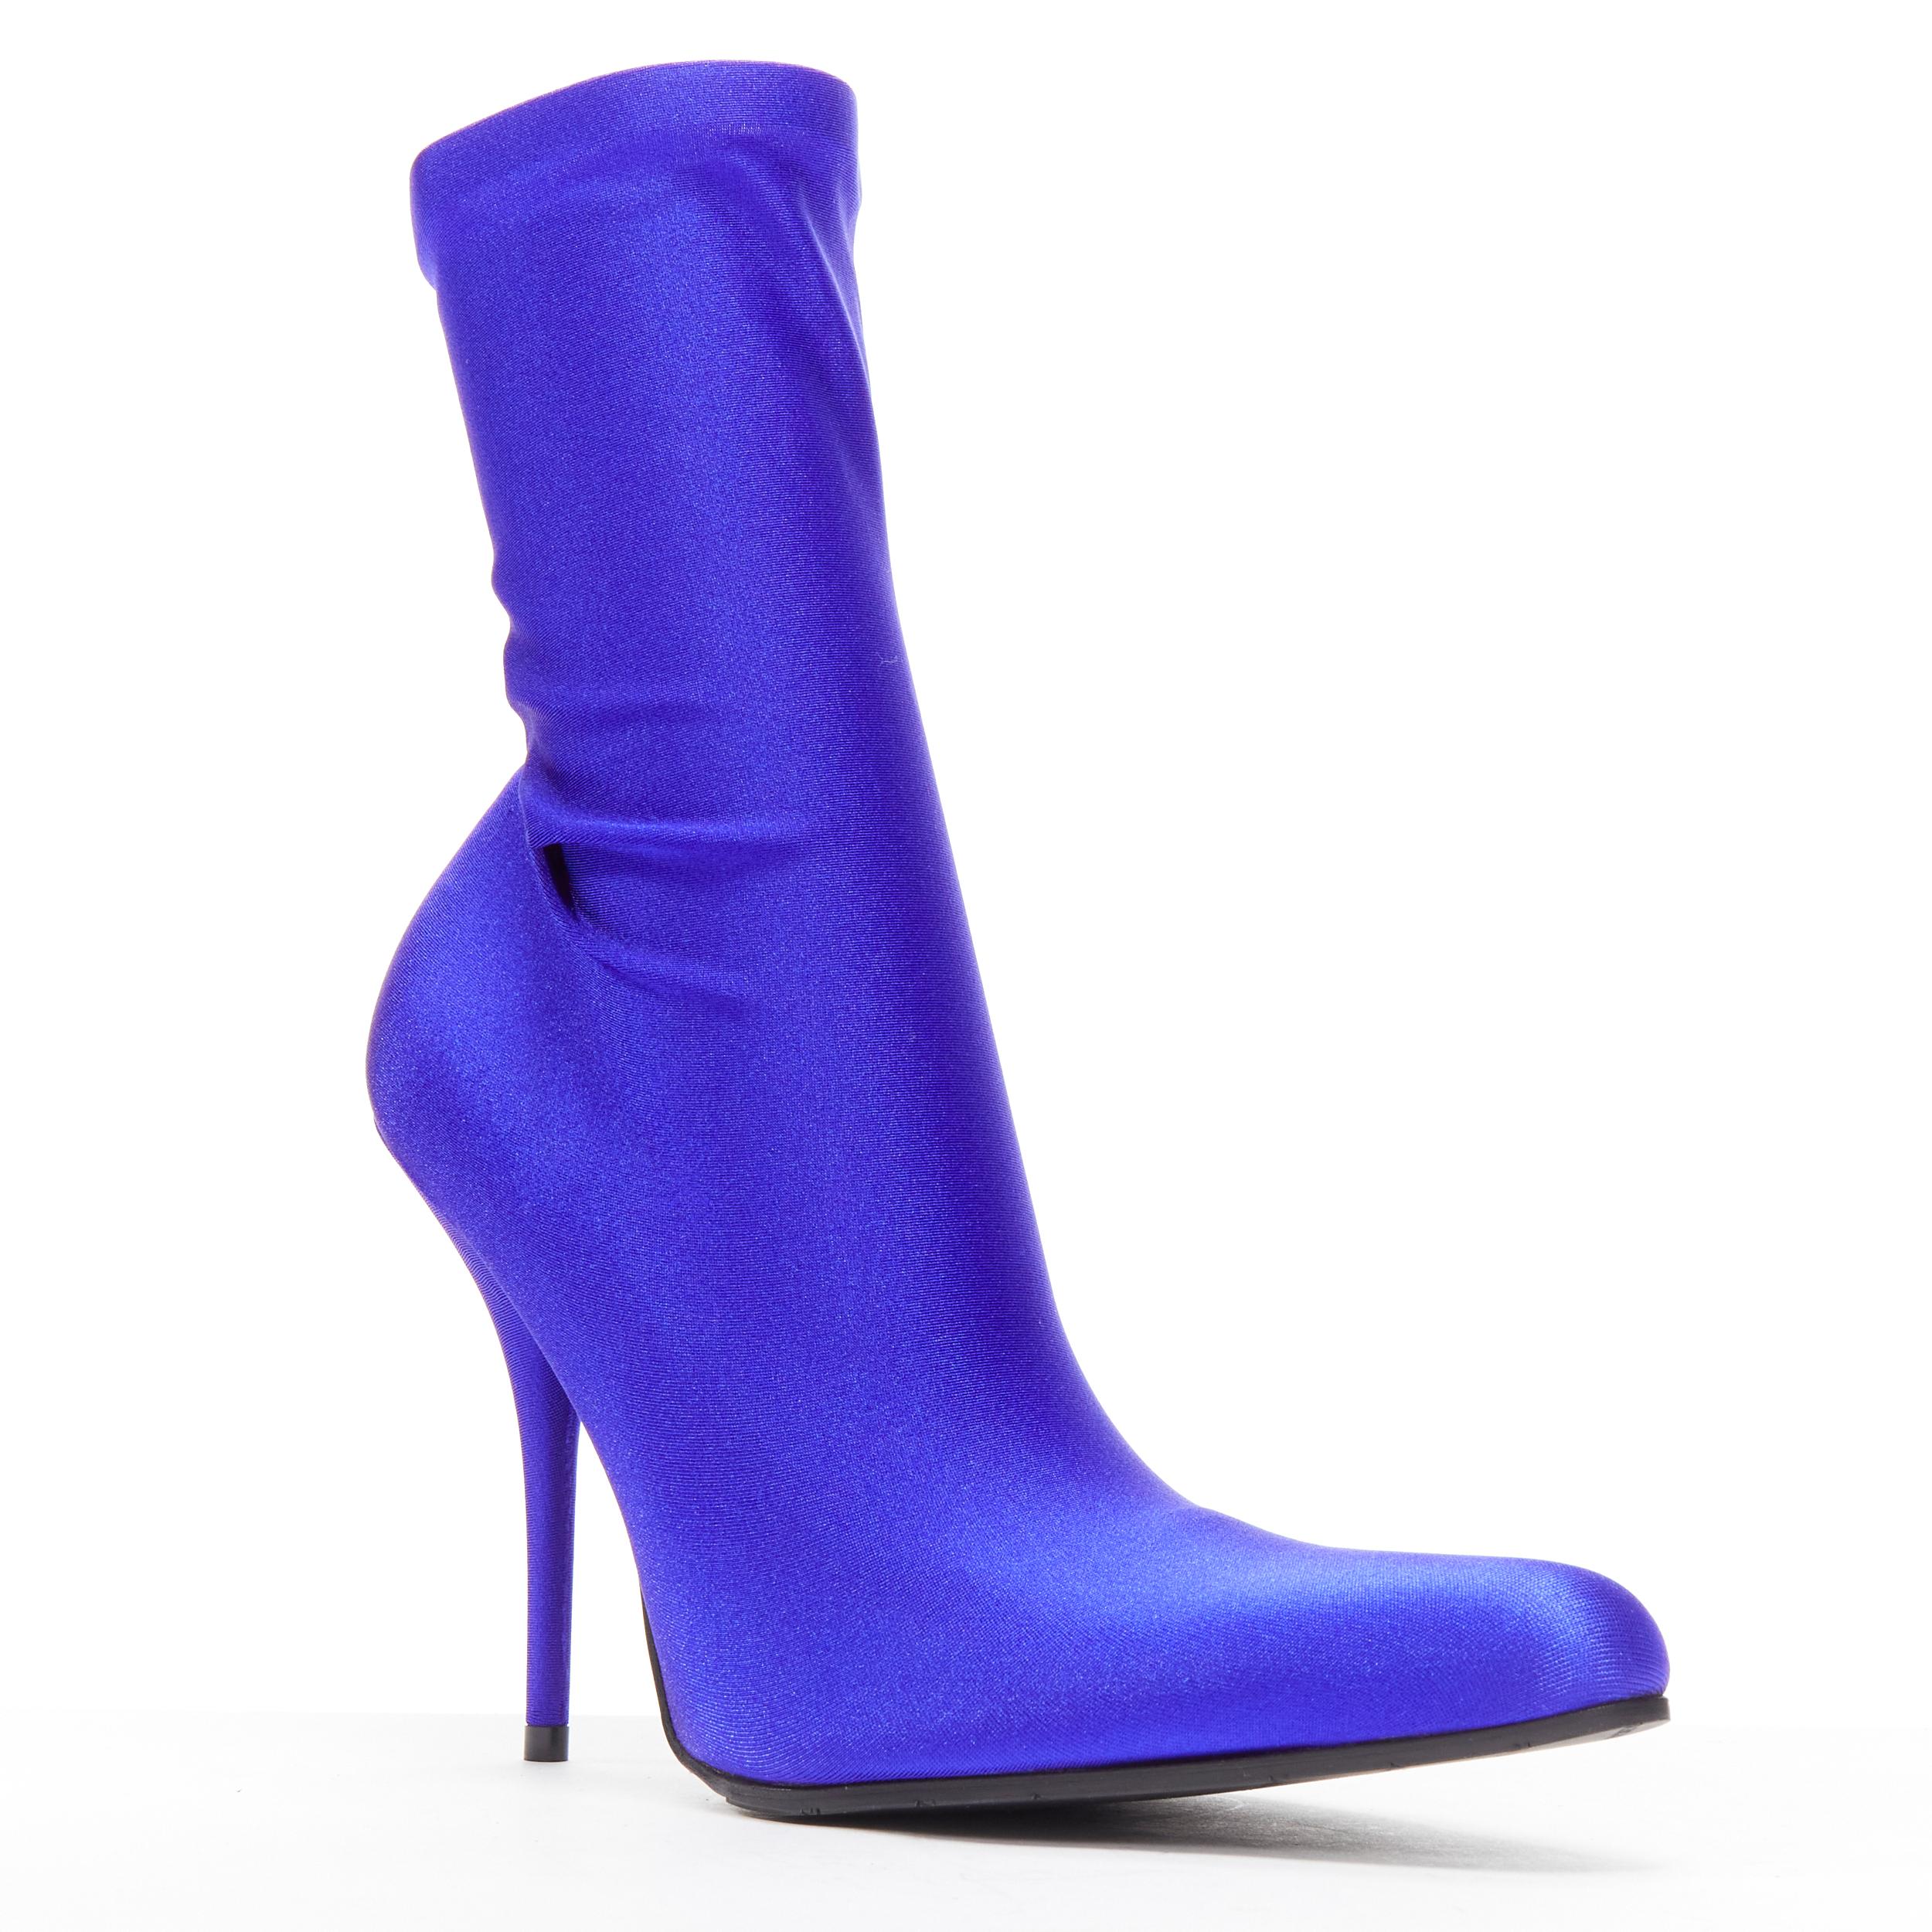 new BALENCIAGA Demna blue lycra high heeled sock boots EU38 Kim Kardashian
Reference: TGAS/D00194
Brand: Balenciaga
Designer: Demna
Model: Sock boot
Material: Jersey
Color: Blue
Pattern: Solid
Closure: Stretchy
Lining: Black Leather
Extra Details: